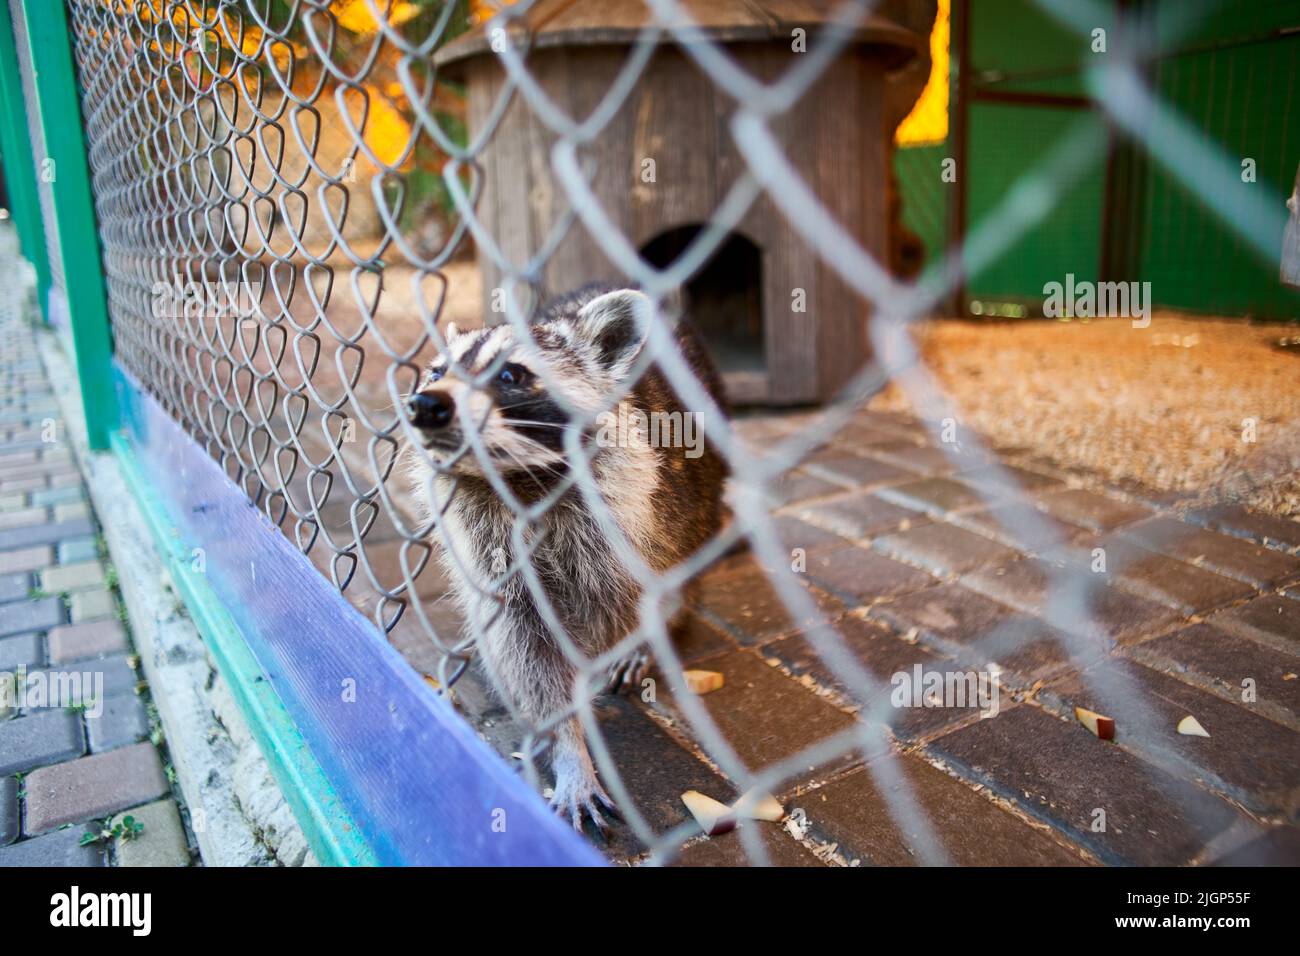 footage of raccoons in the aviary Stock Photo